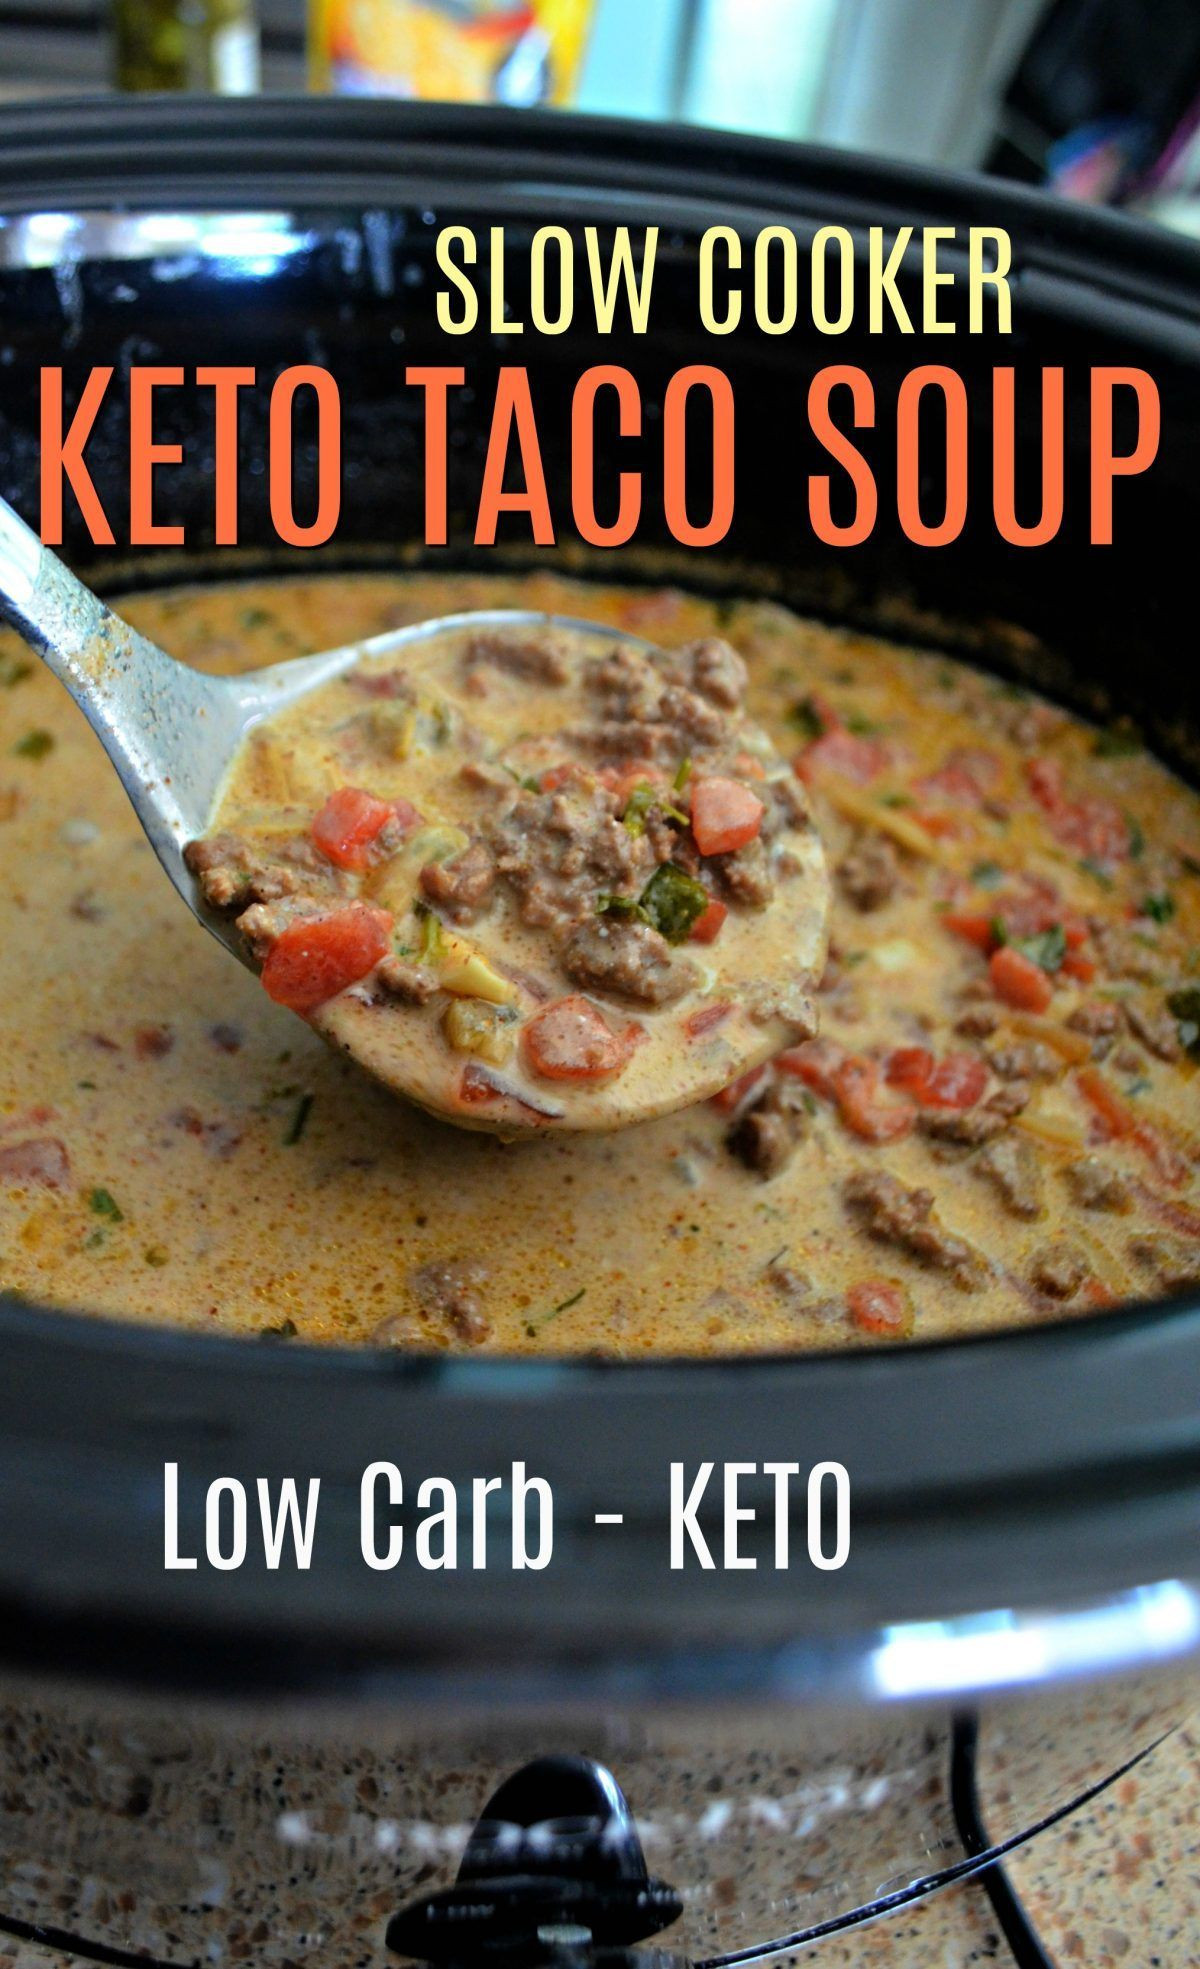 Slow Cooker Keto Soup
 Make the BEST Keto Taco Soup in Your Slow Cooker or